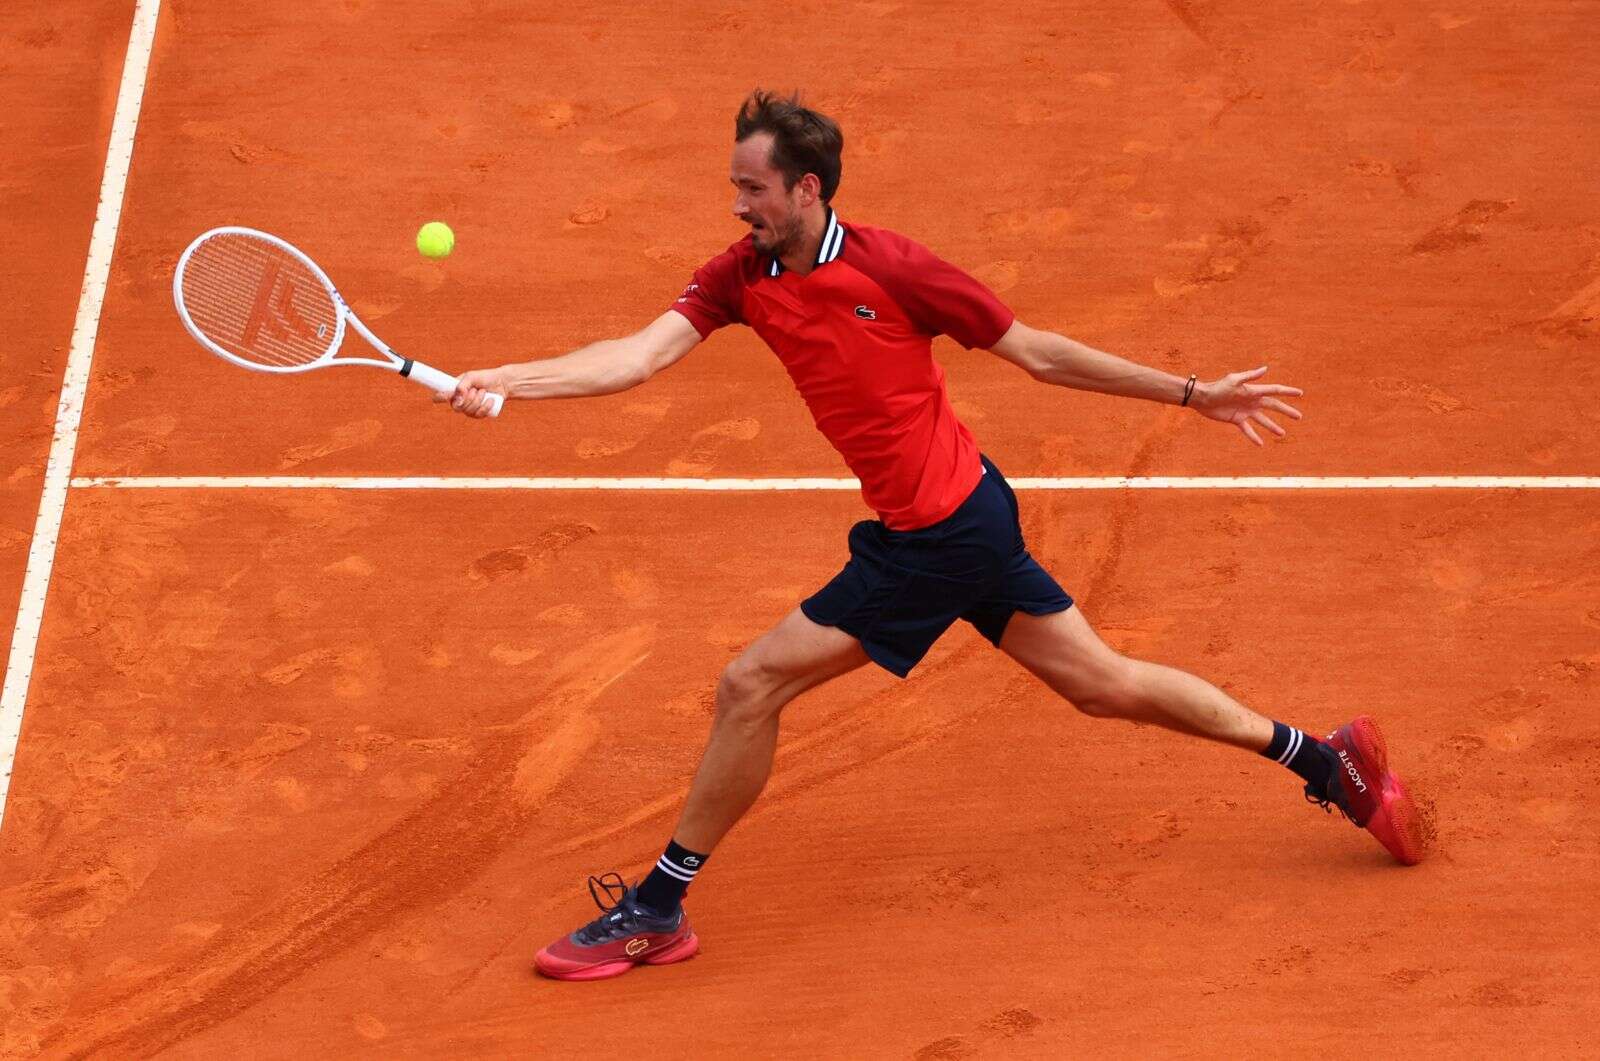 rome win bolsters medvedev's confidence levels for claycourt swing